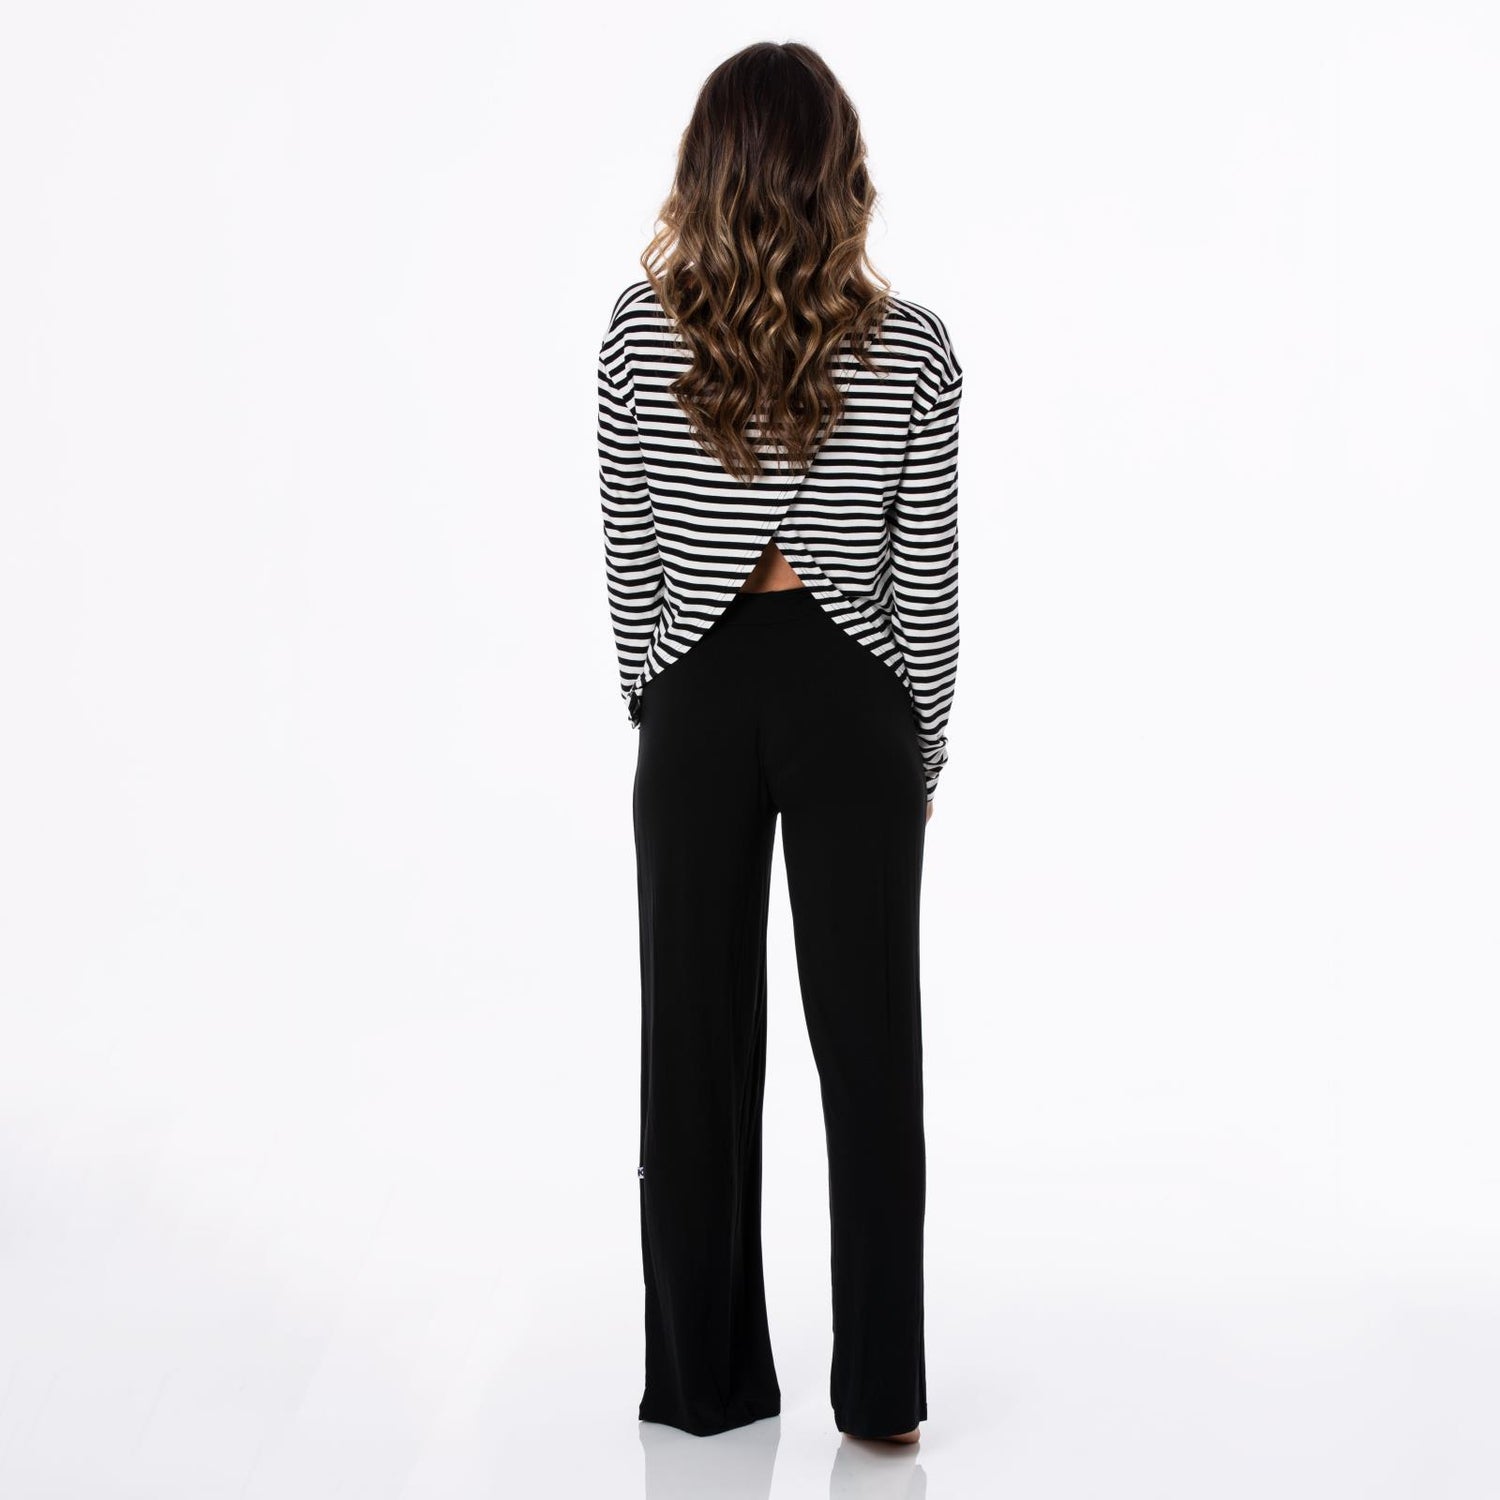 Women's Solid Lounge Pants in Midnight